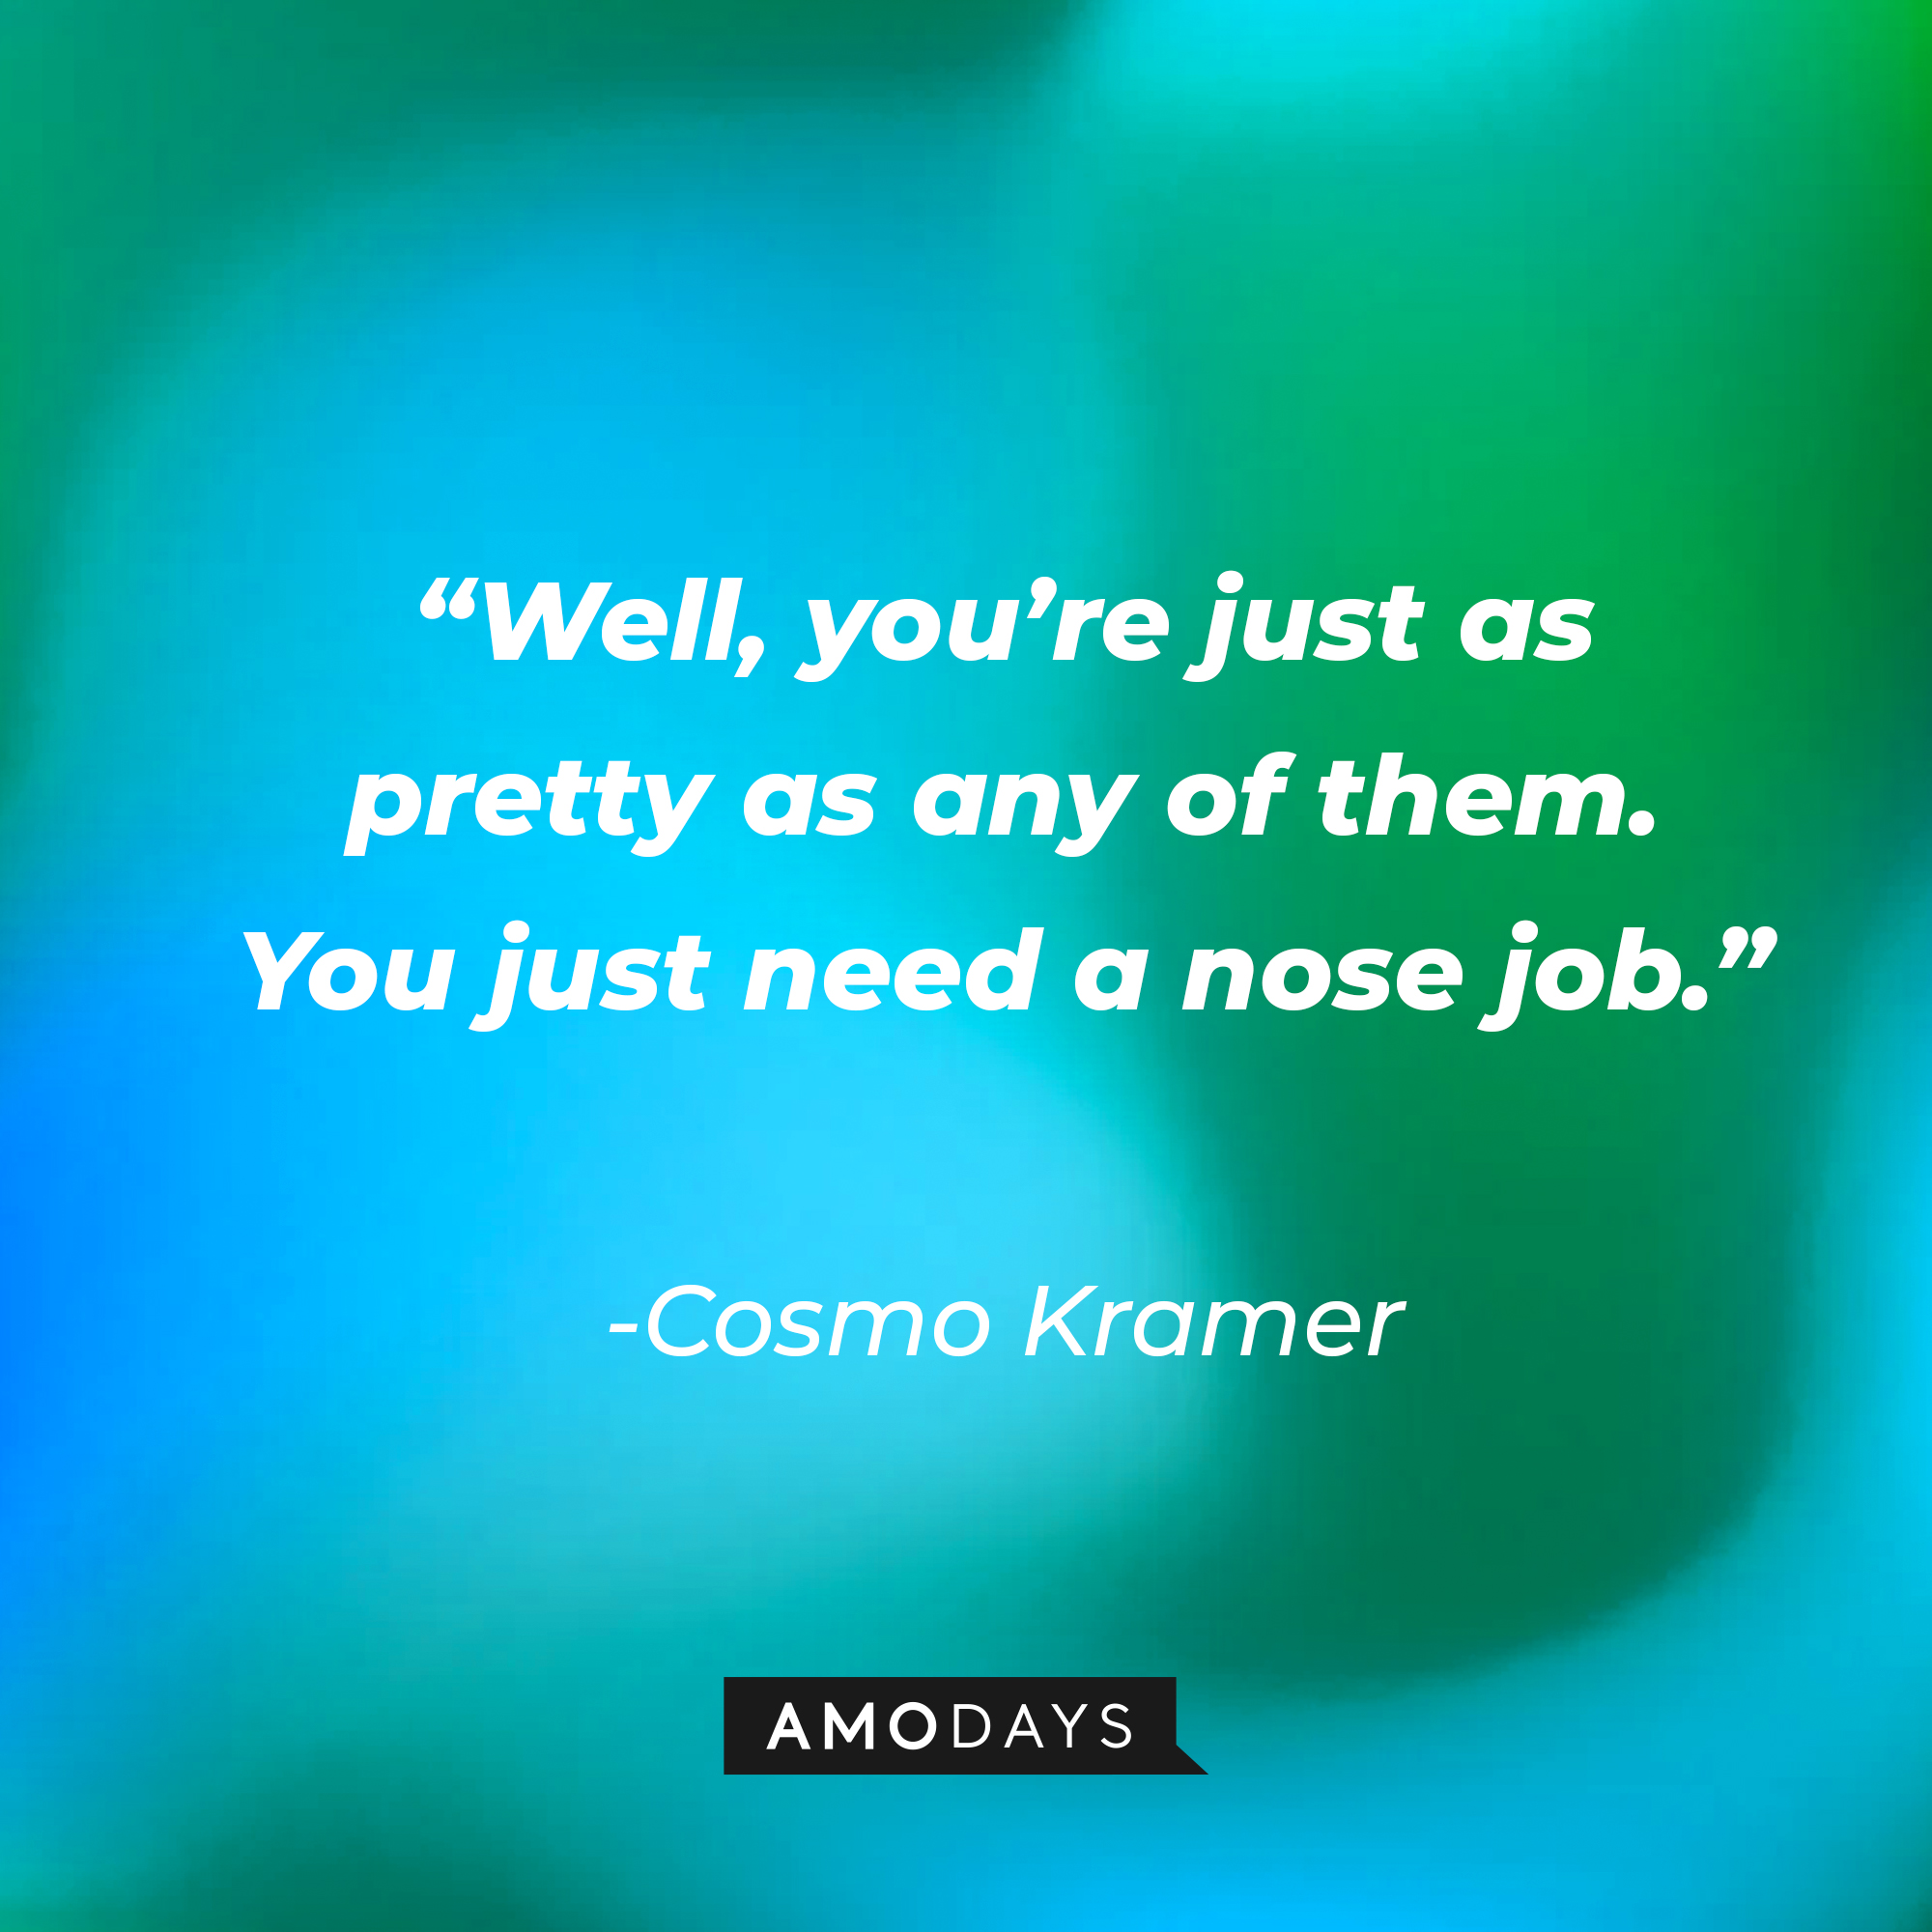 Cosmo Kramer’s quote: “Well, you’re just as pretty as any of them. You just need a nose job.” | Source: AmoDays